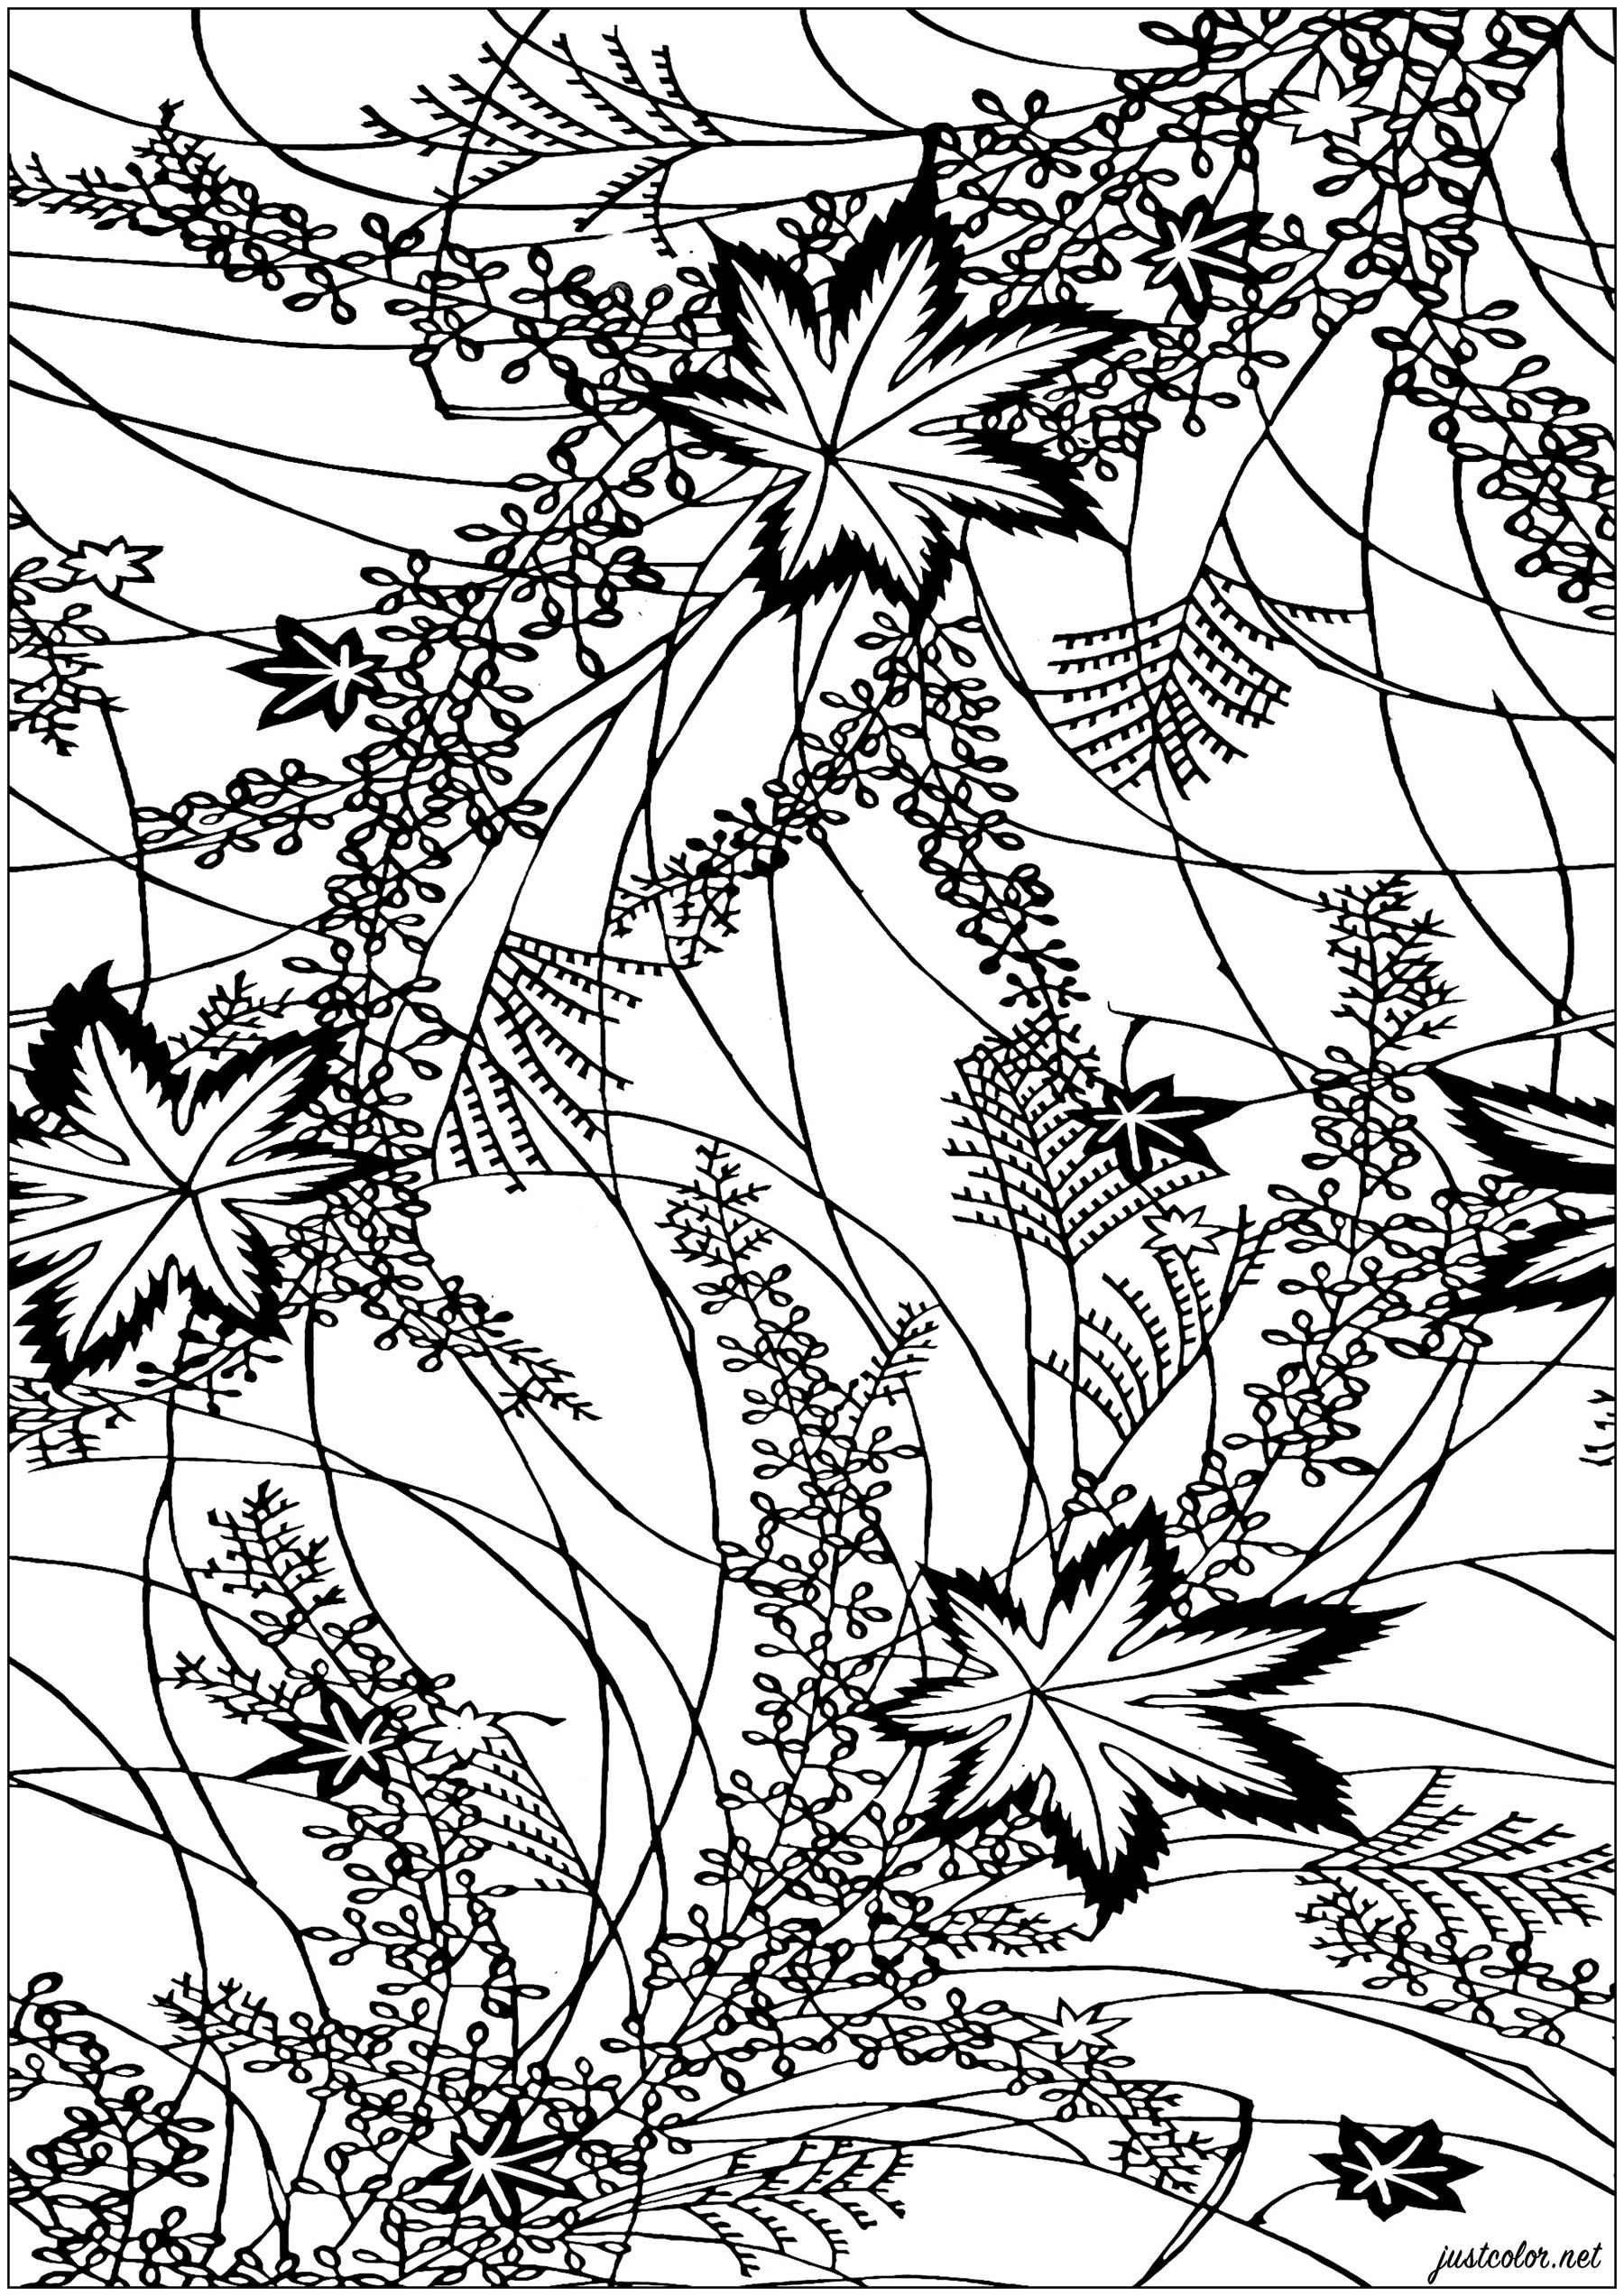 Coloring page created from a Traditional Japanese Stencil Design - model 2. The stencils are made from pieces of paper layered one on top of one another, stuck together using persimmon sap, making the material impermeable, and then cut. A mesh of silk thread is stretched between the two parts of the decoration to hold everything in place. One stencil is needed per color.Their size depends on the width of the panel making up the kimono.